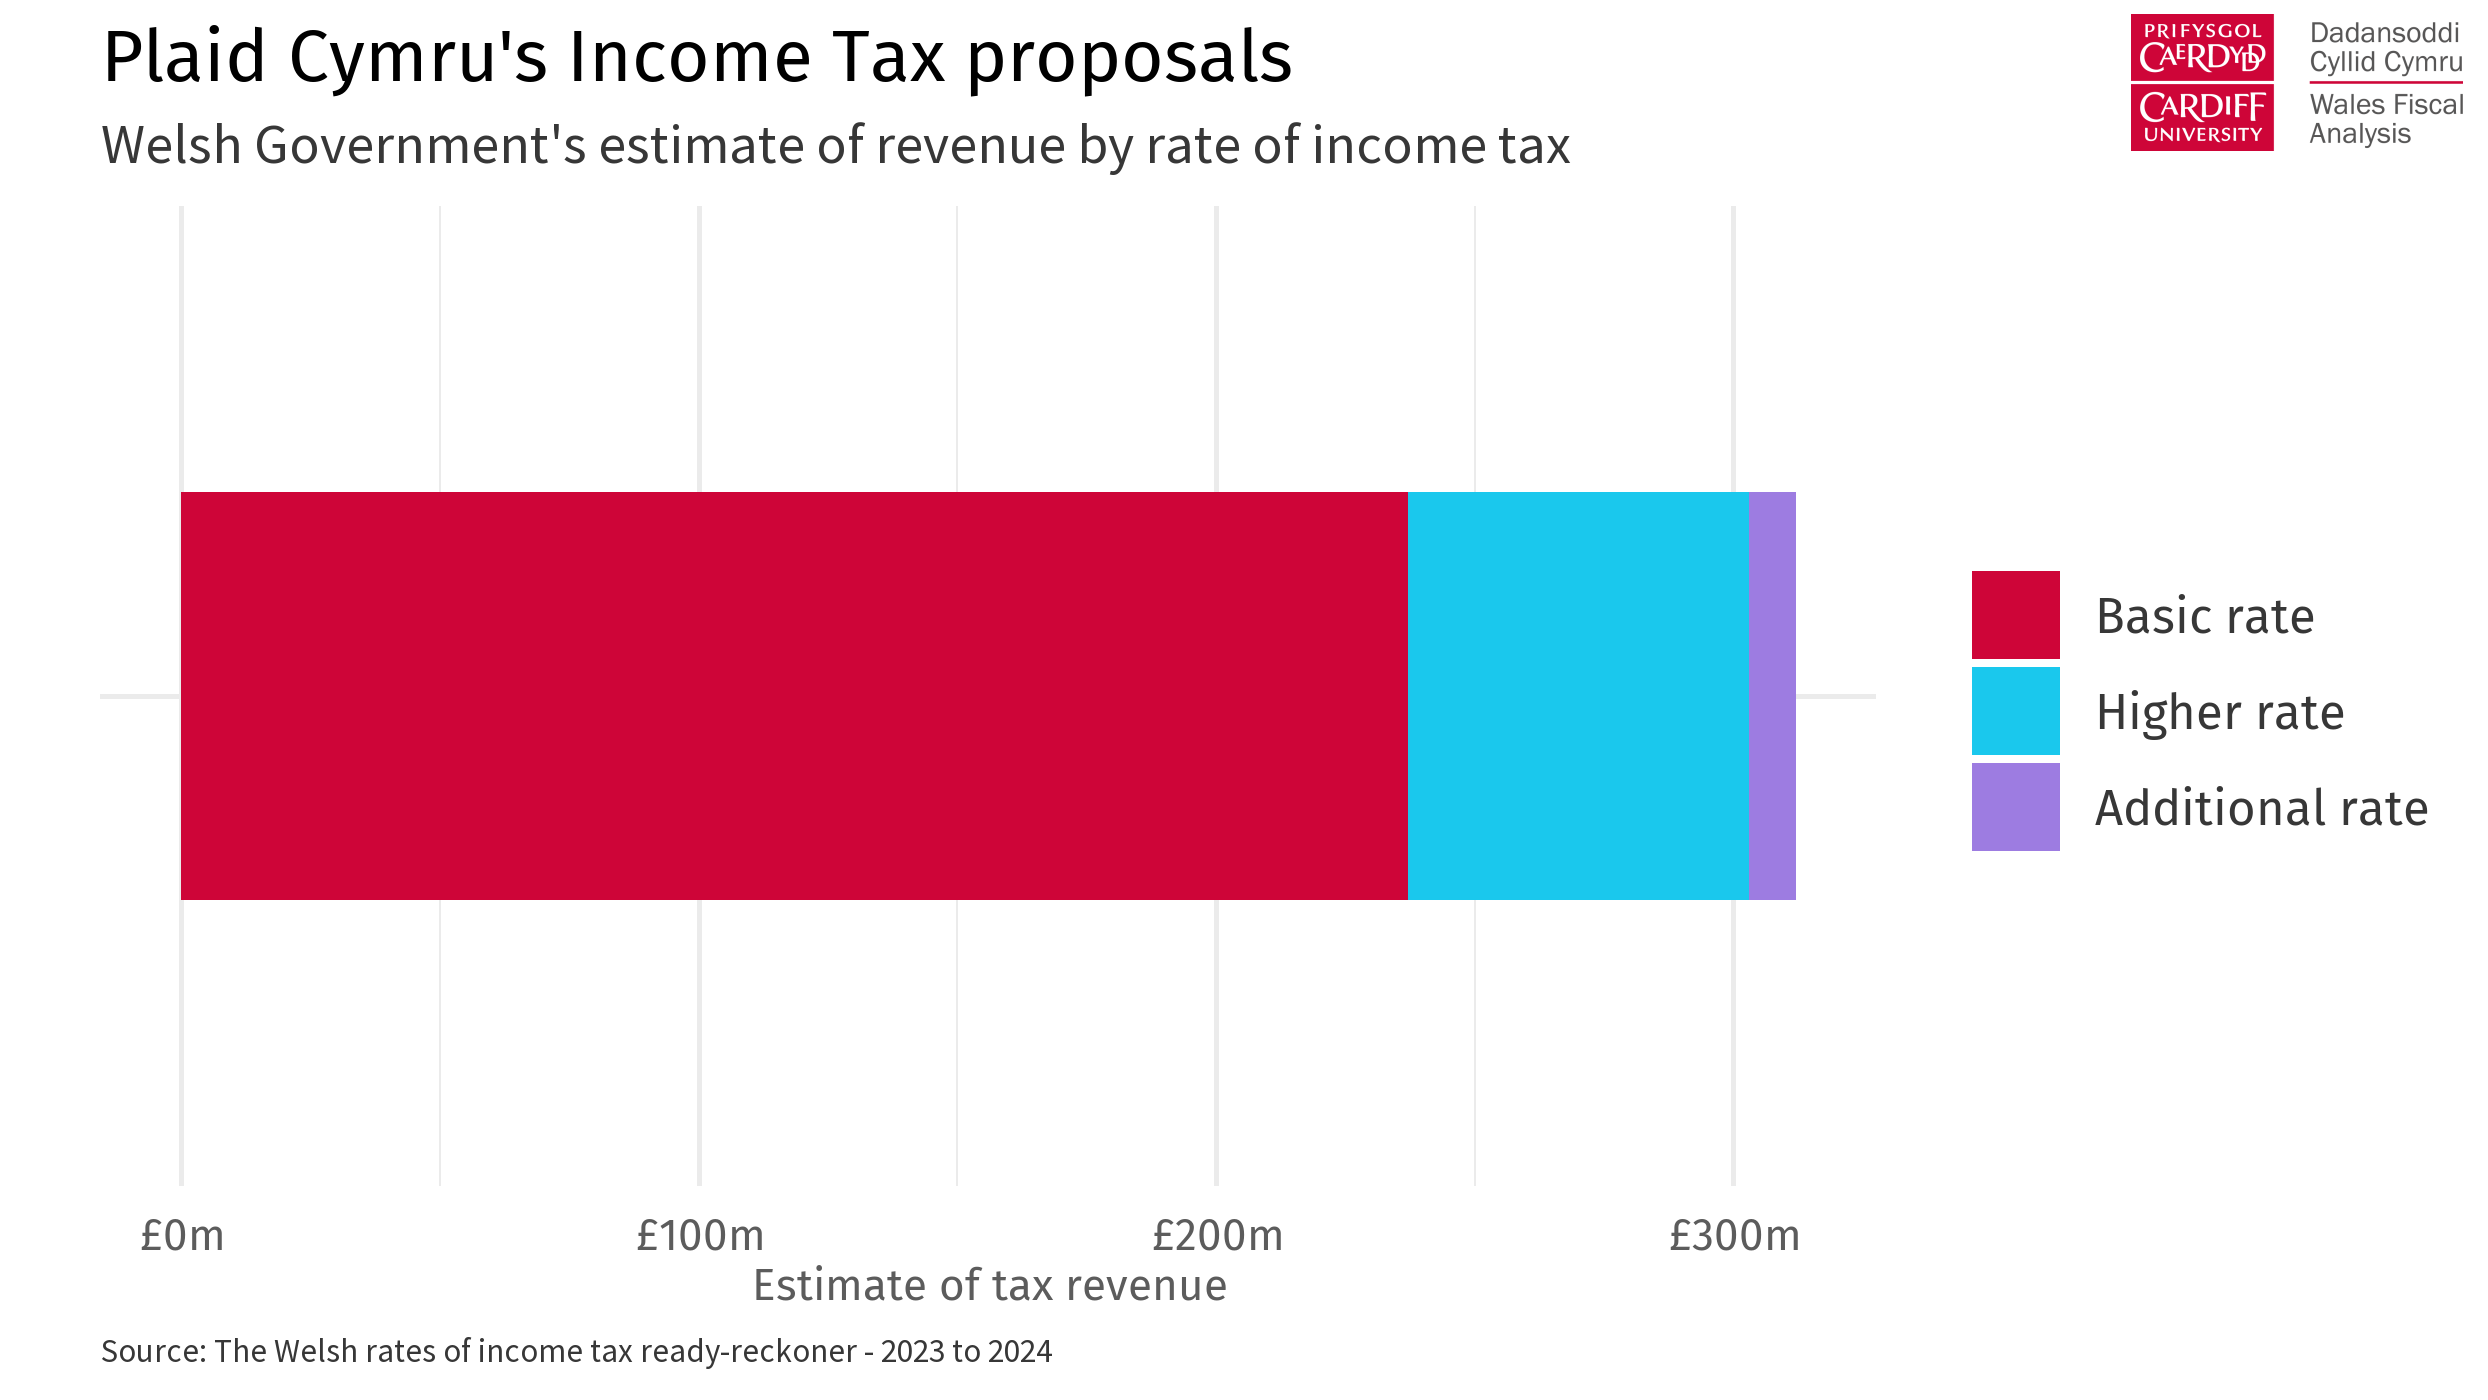 The image has the title Plaid Cymru's Income Tax proposals and subtitle Welsh Government's estimate of revenue by rate of income tax. A single horizontal bar shows the basic rate reaching 237 million pounds, the higher rate, 303 million pounds, and the additional rate the total estimate of 312 million pounds. The source is The Welsh rates of Income tax ready-recknoer - 2023-2024. To the right and above is the Cardiff University and Wales Fiscal Analysis logo.